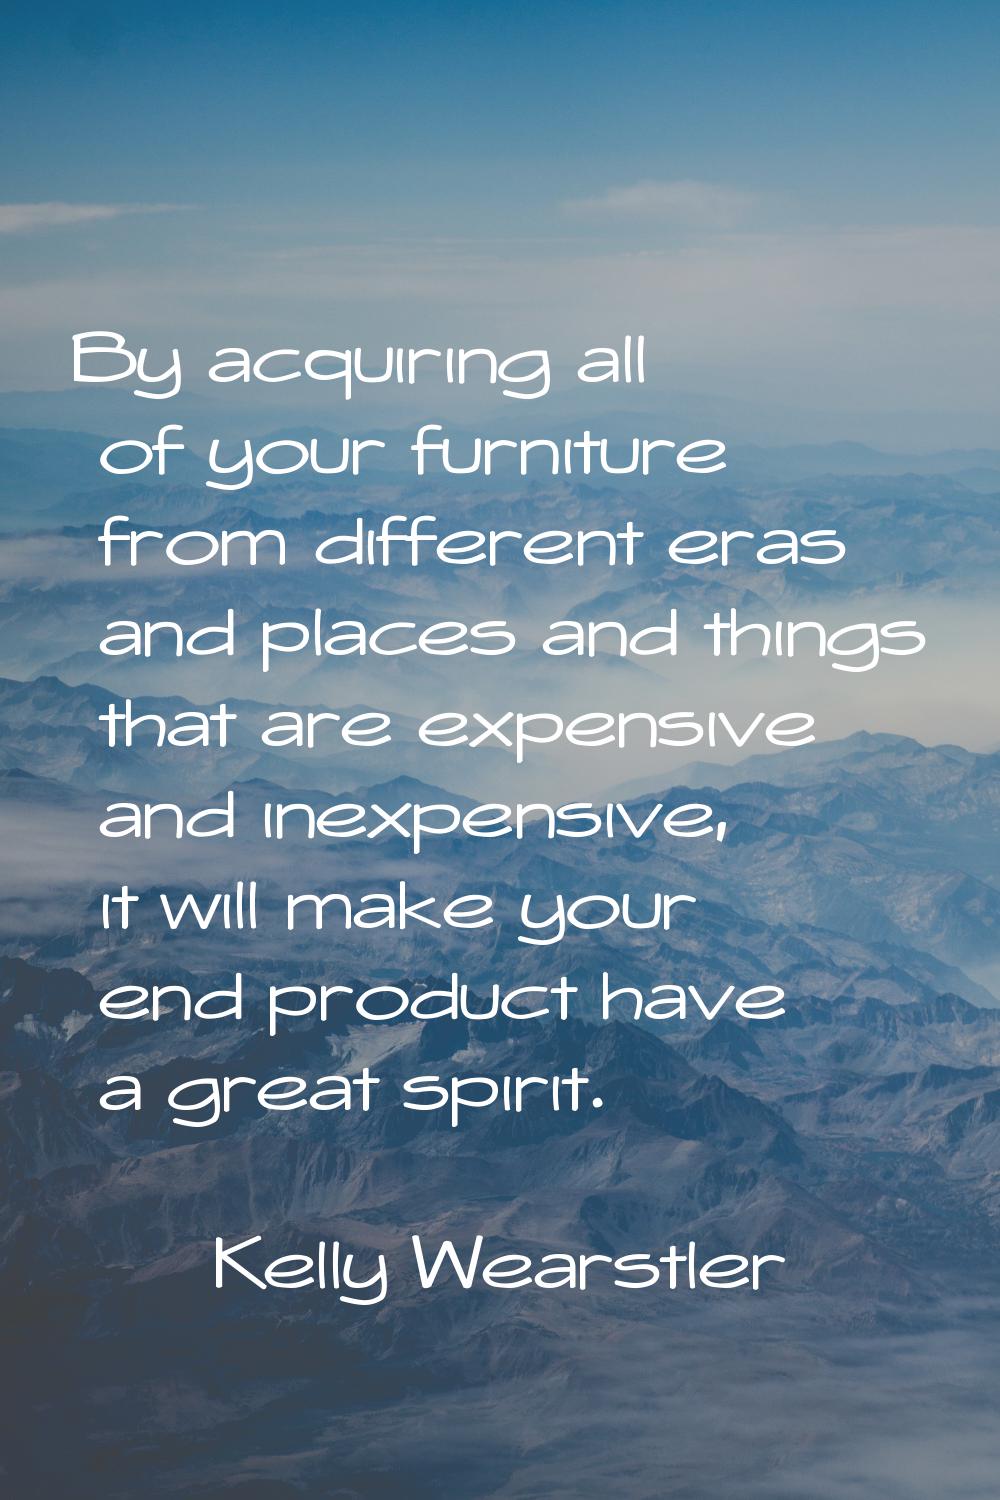 By acquiring all of your furniture from different eras and places and things that are expensive and